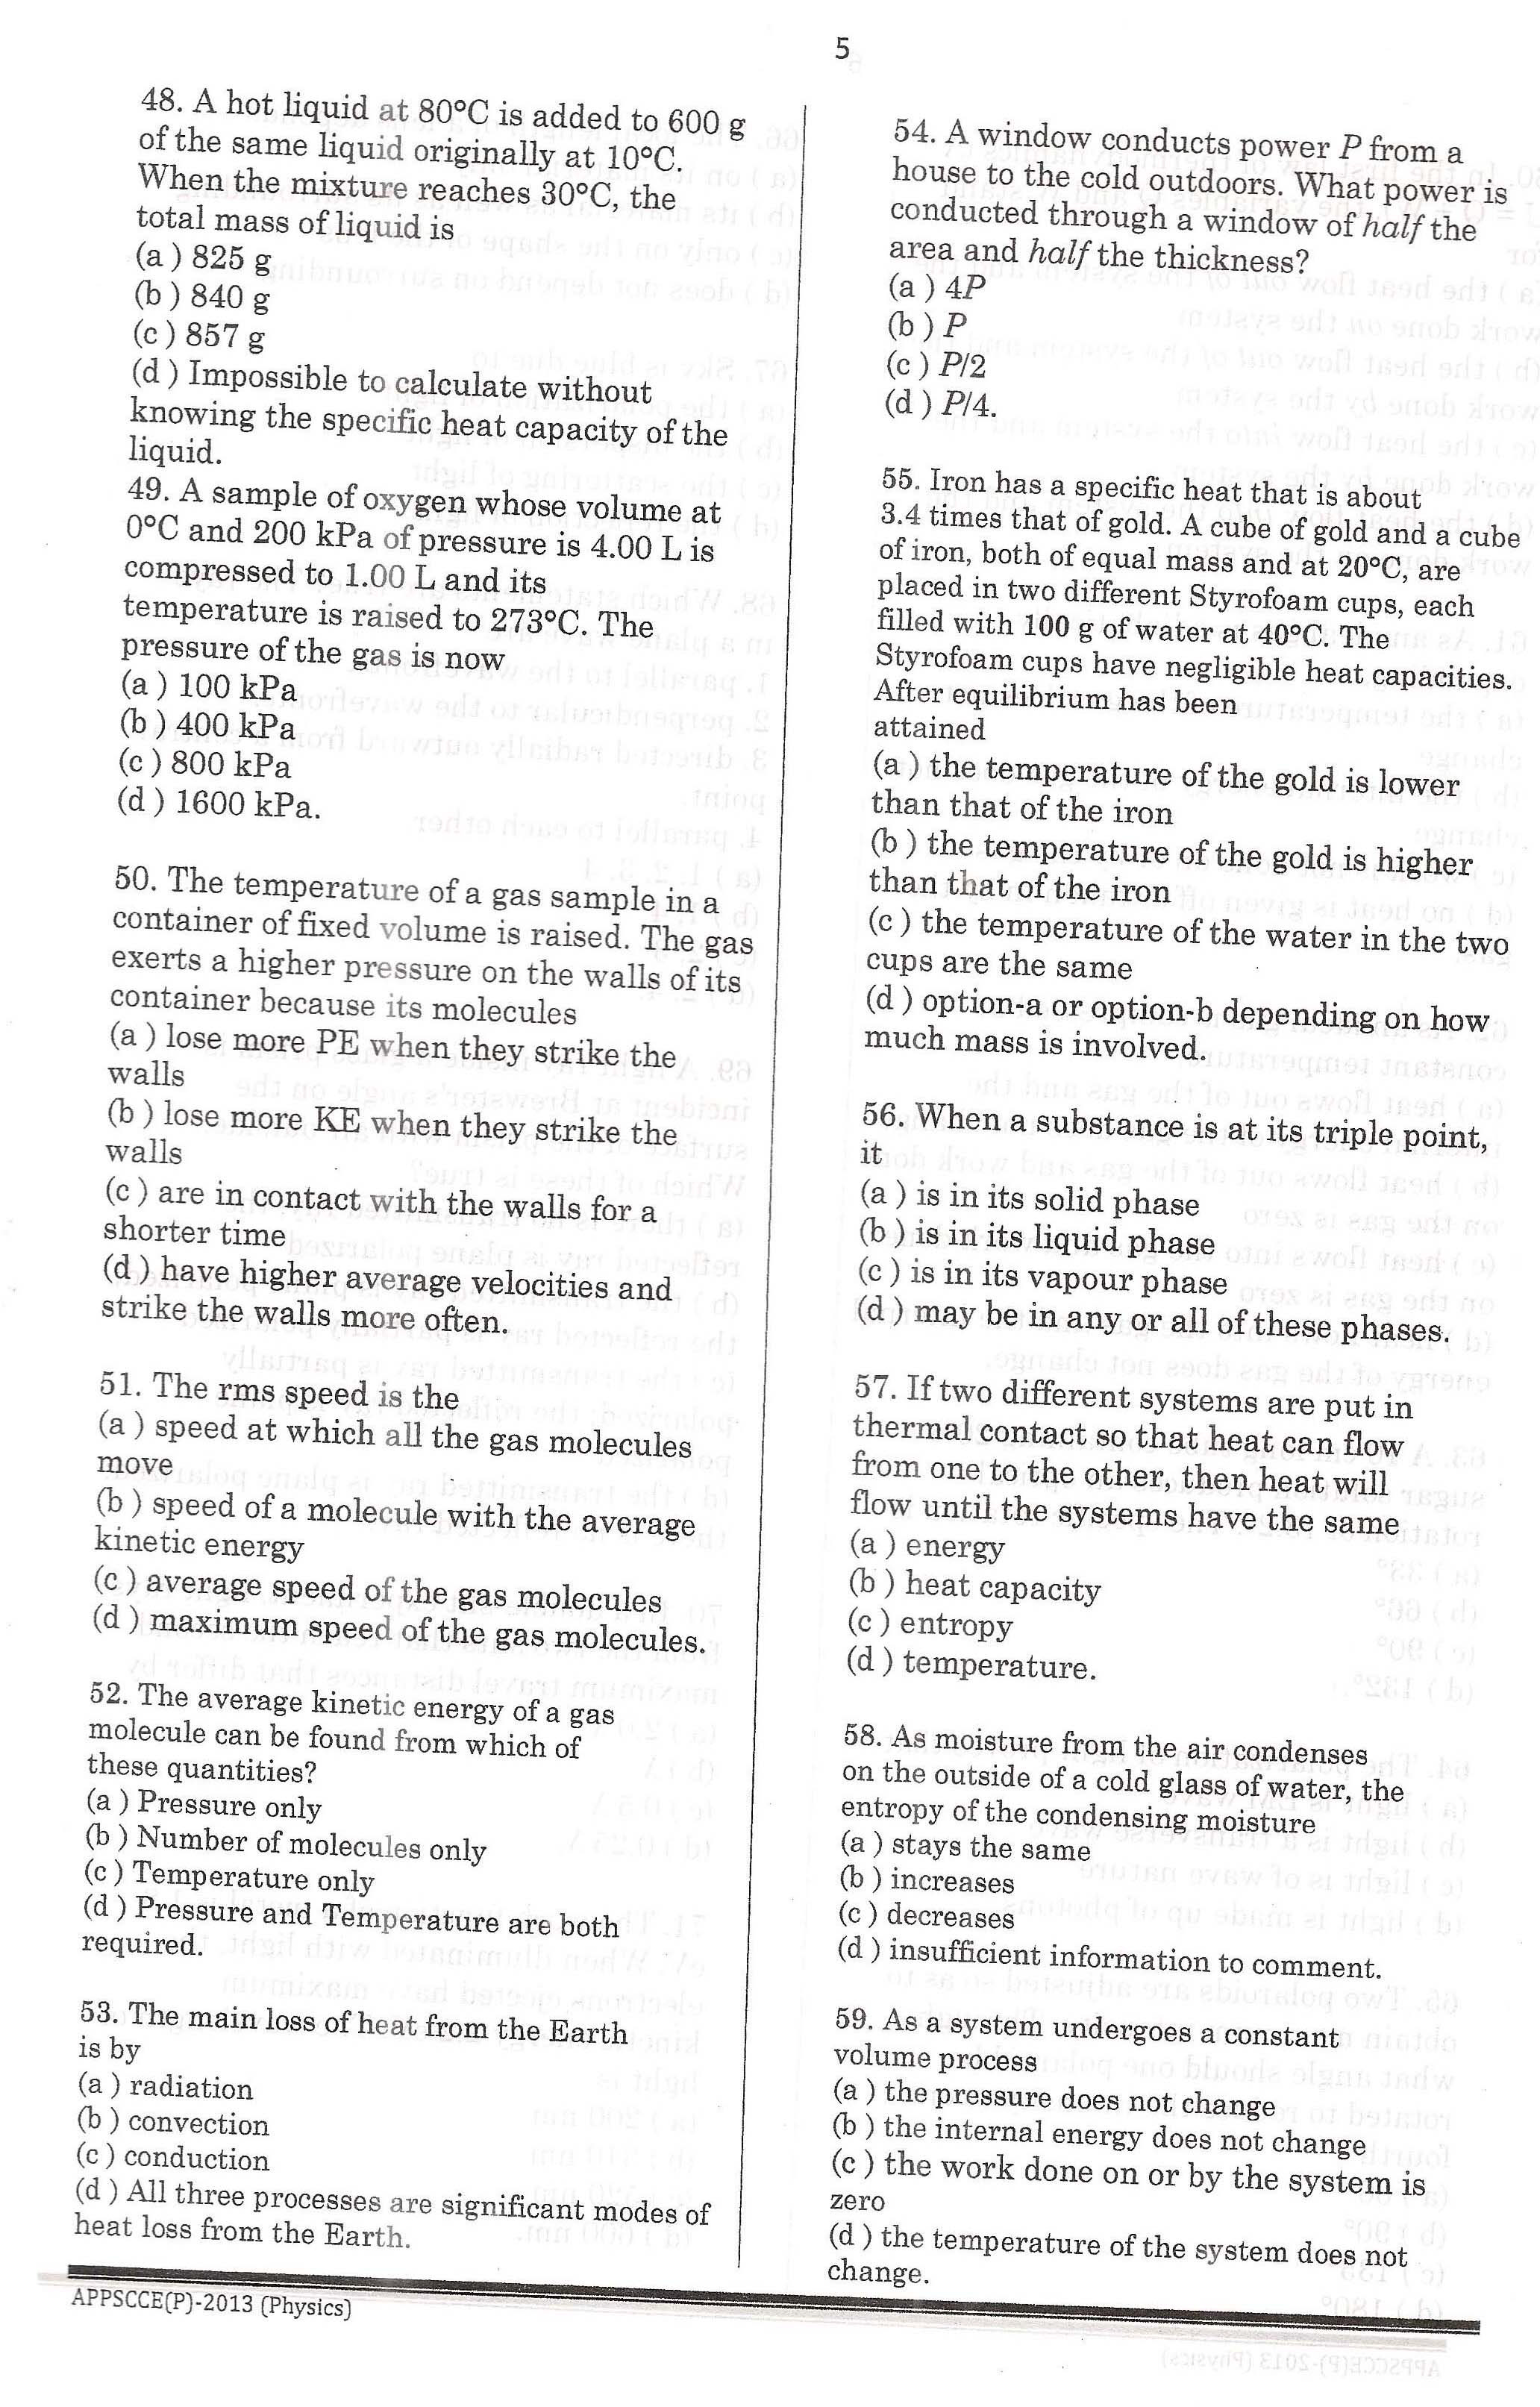 APPSC Combined Competitive Prelims Exam 2013 Physics 6